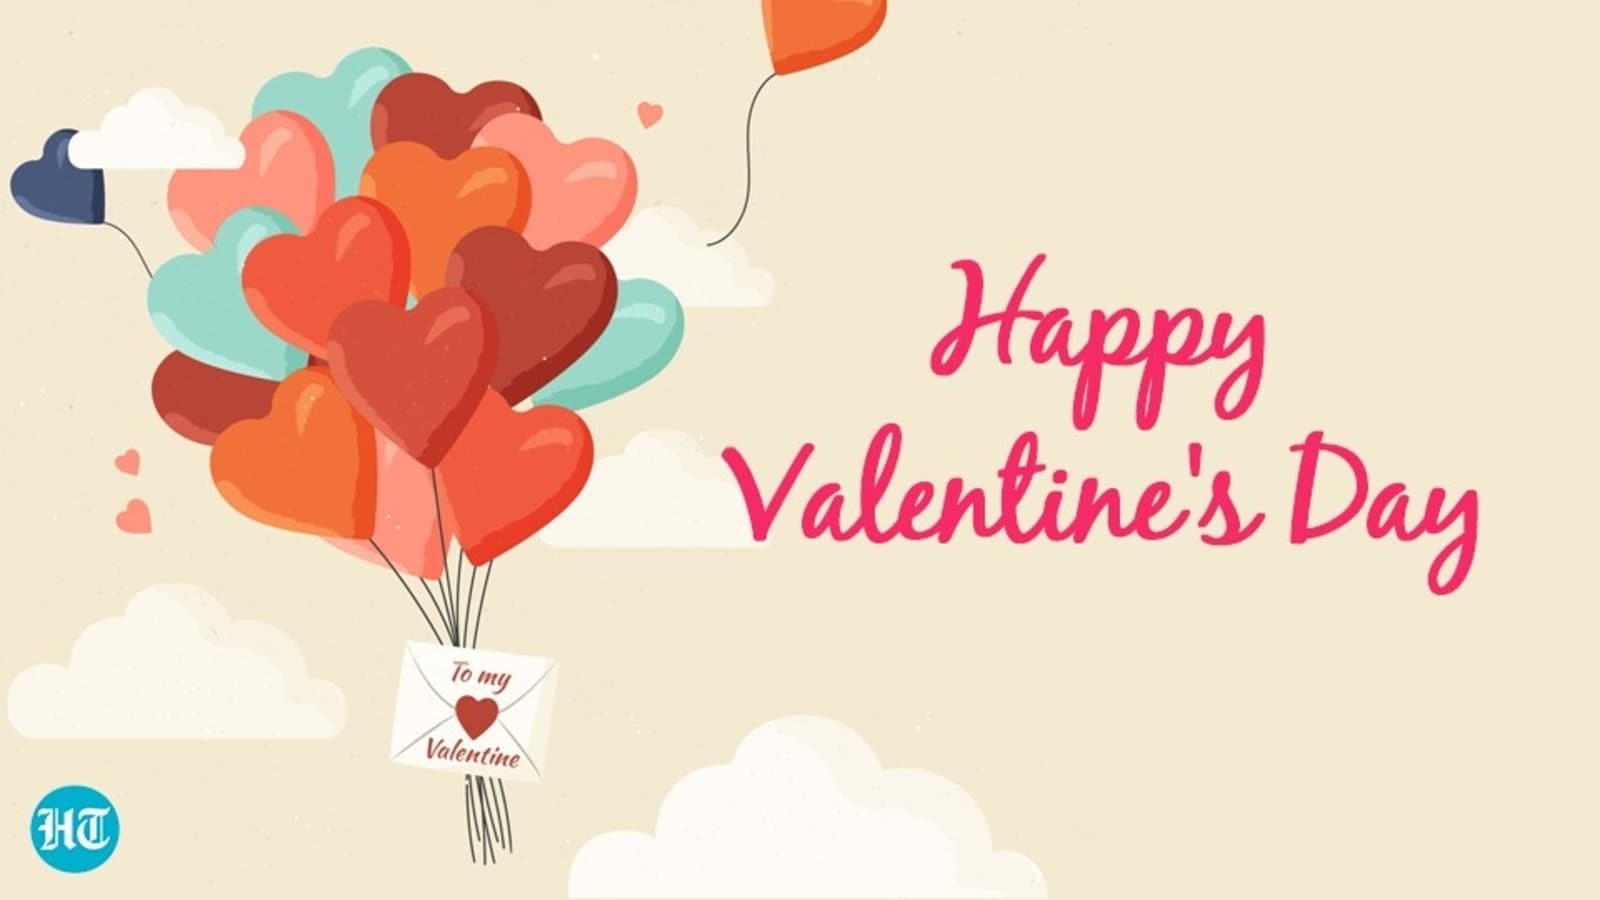 Happy Valentine's Day 2022: Wishes, image, messages to celebrate day of love